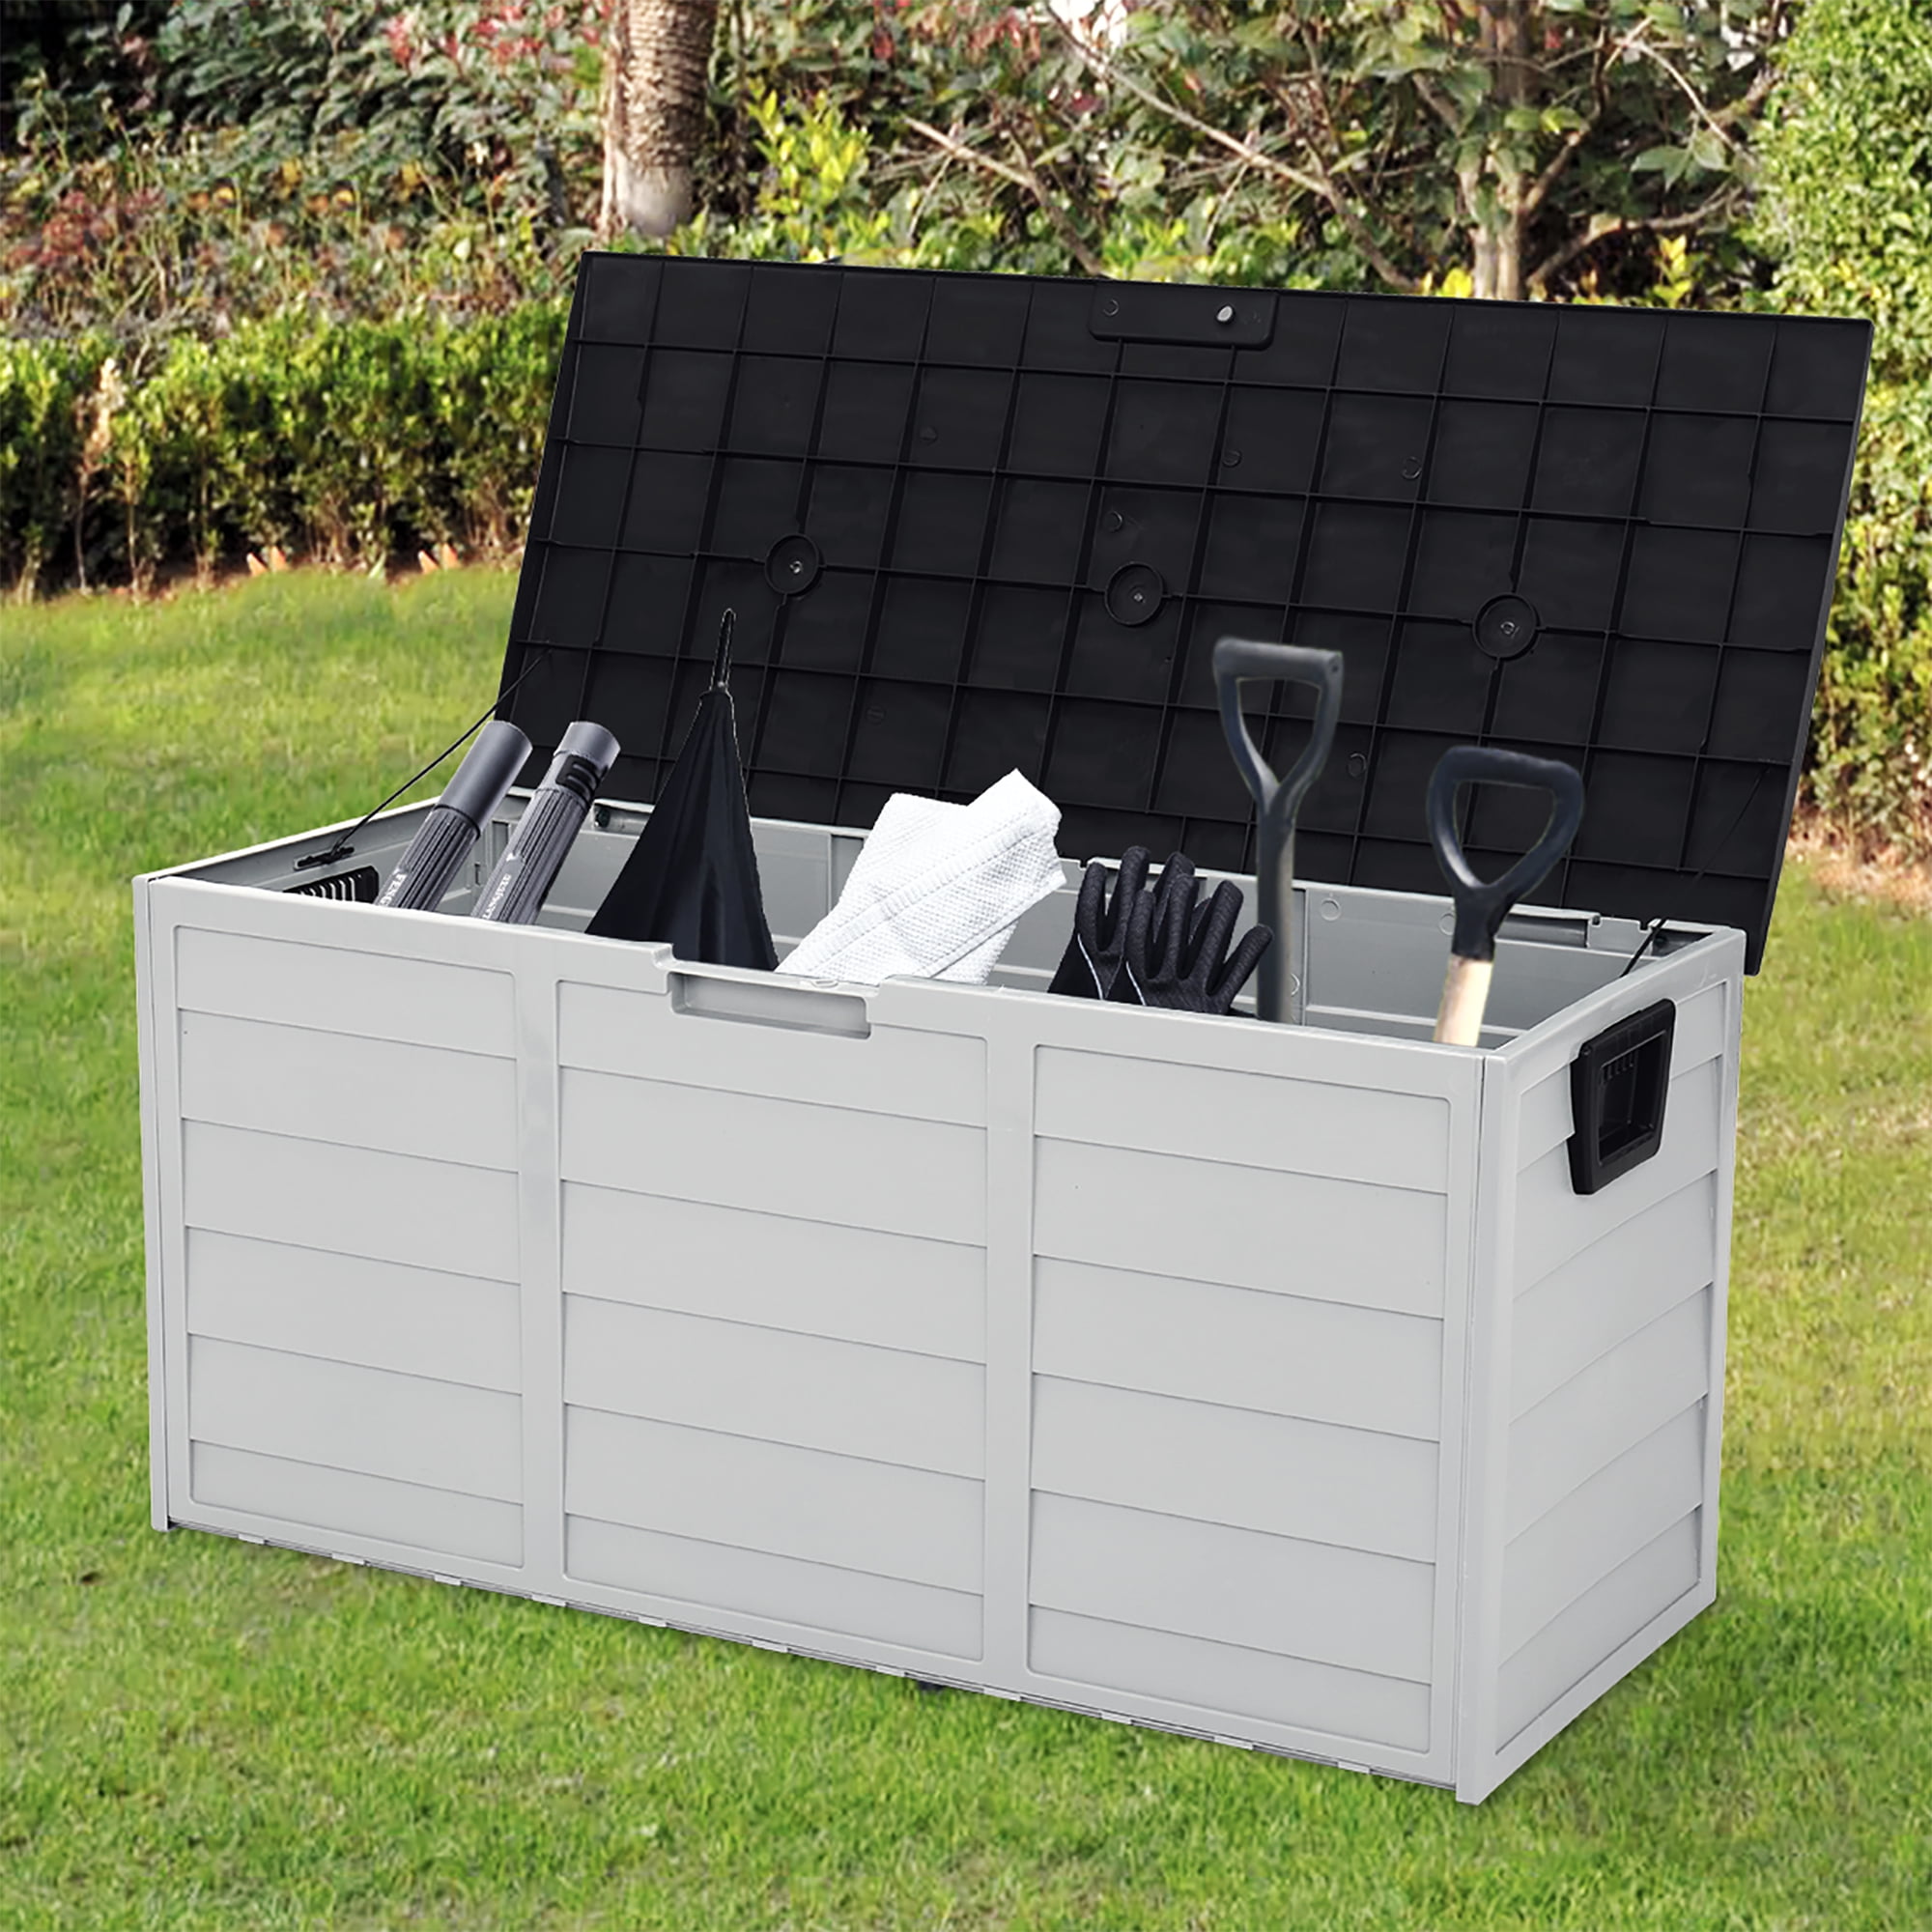 Outdoor Deck Box with Wheels, Large Storage Deck Box for Pool ...